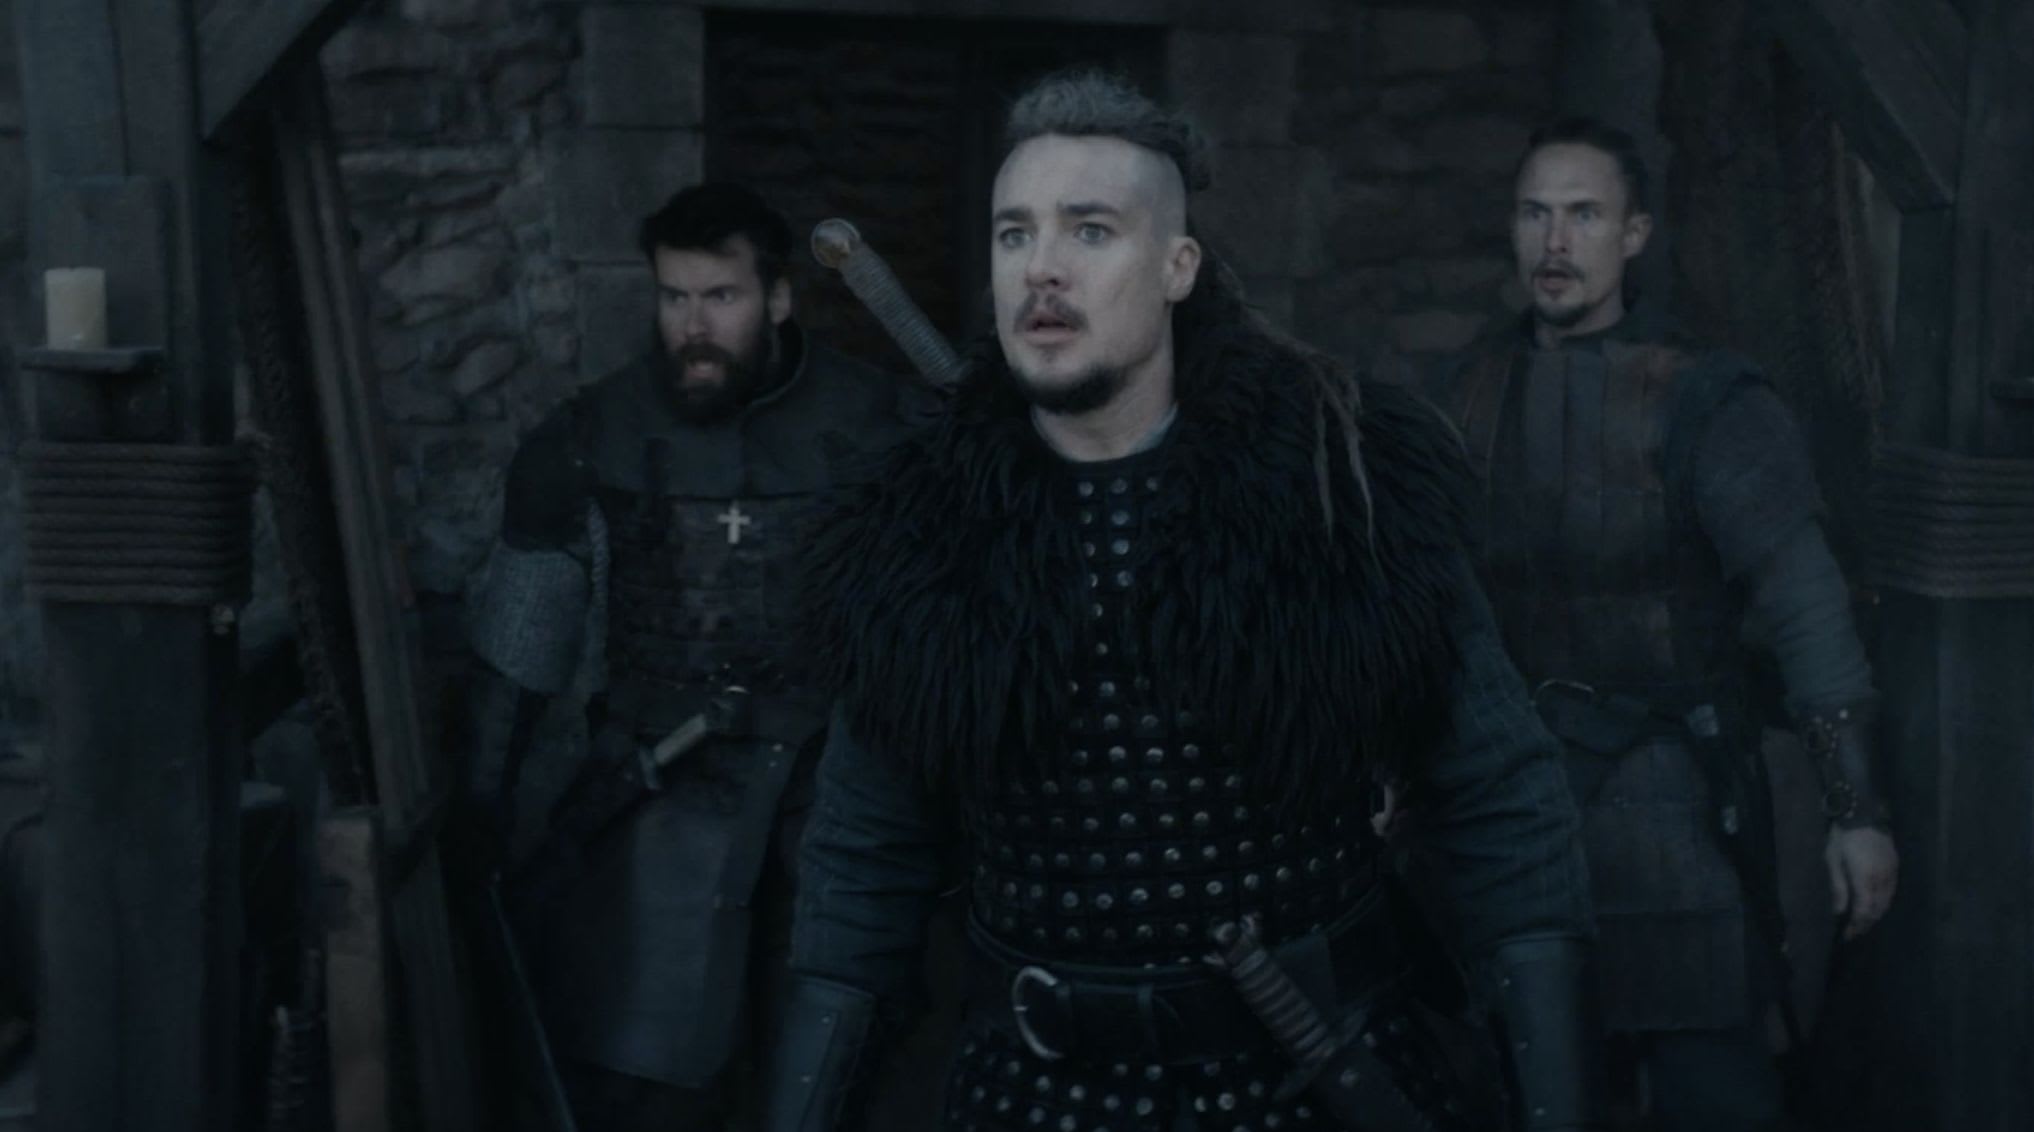 Seven Kings Must Die is a muddled epilogue to The Last Kingdom